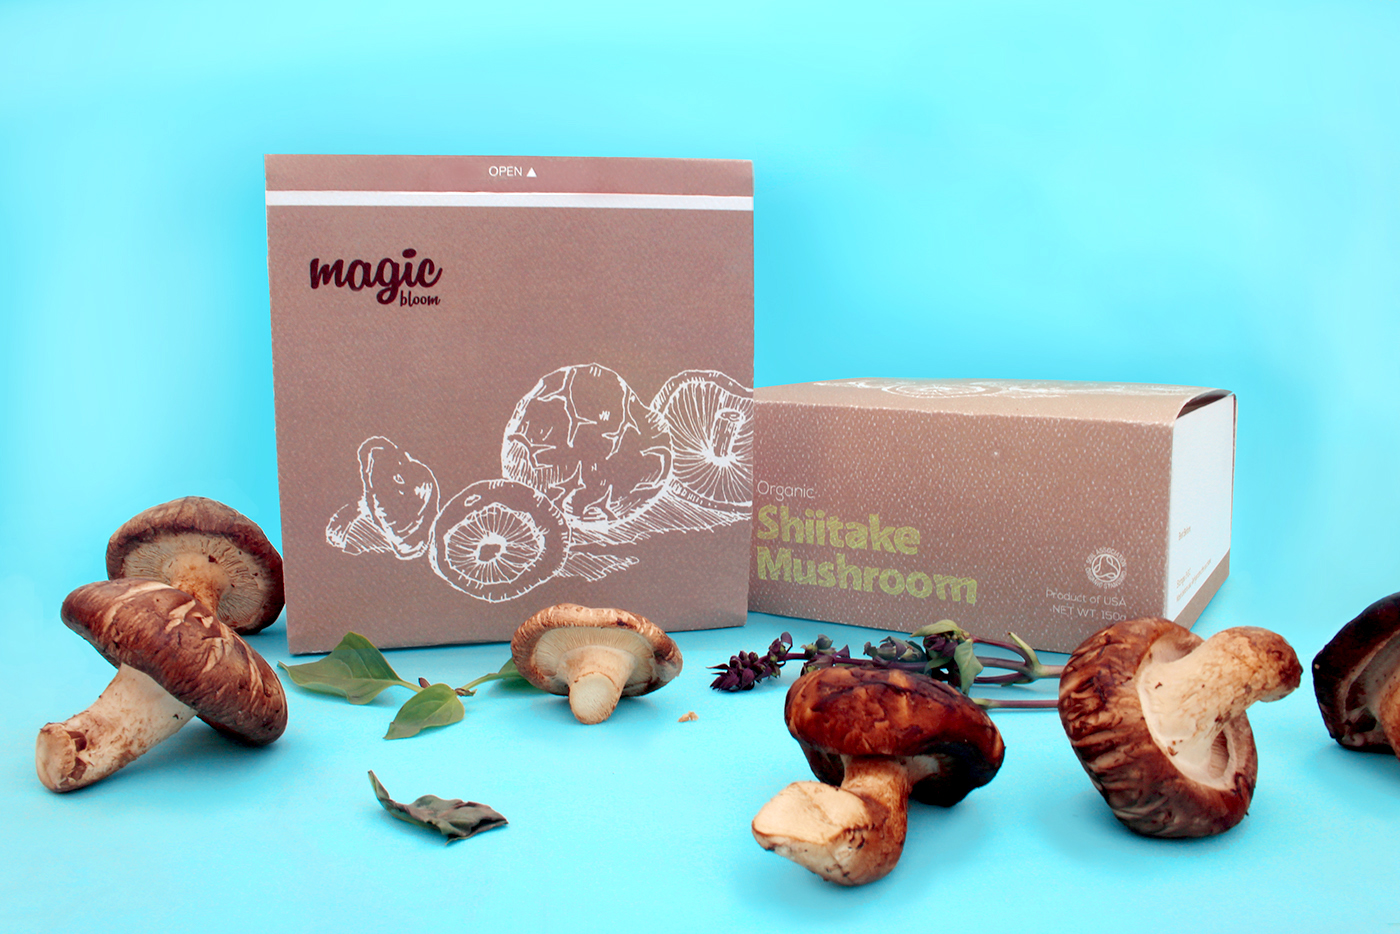 mushroom Sustainable eco-friendly Magic   bloom doodle recyclable paper design graphic Diecut